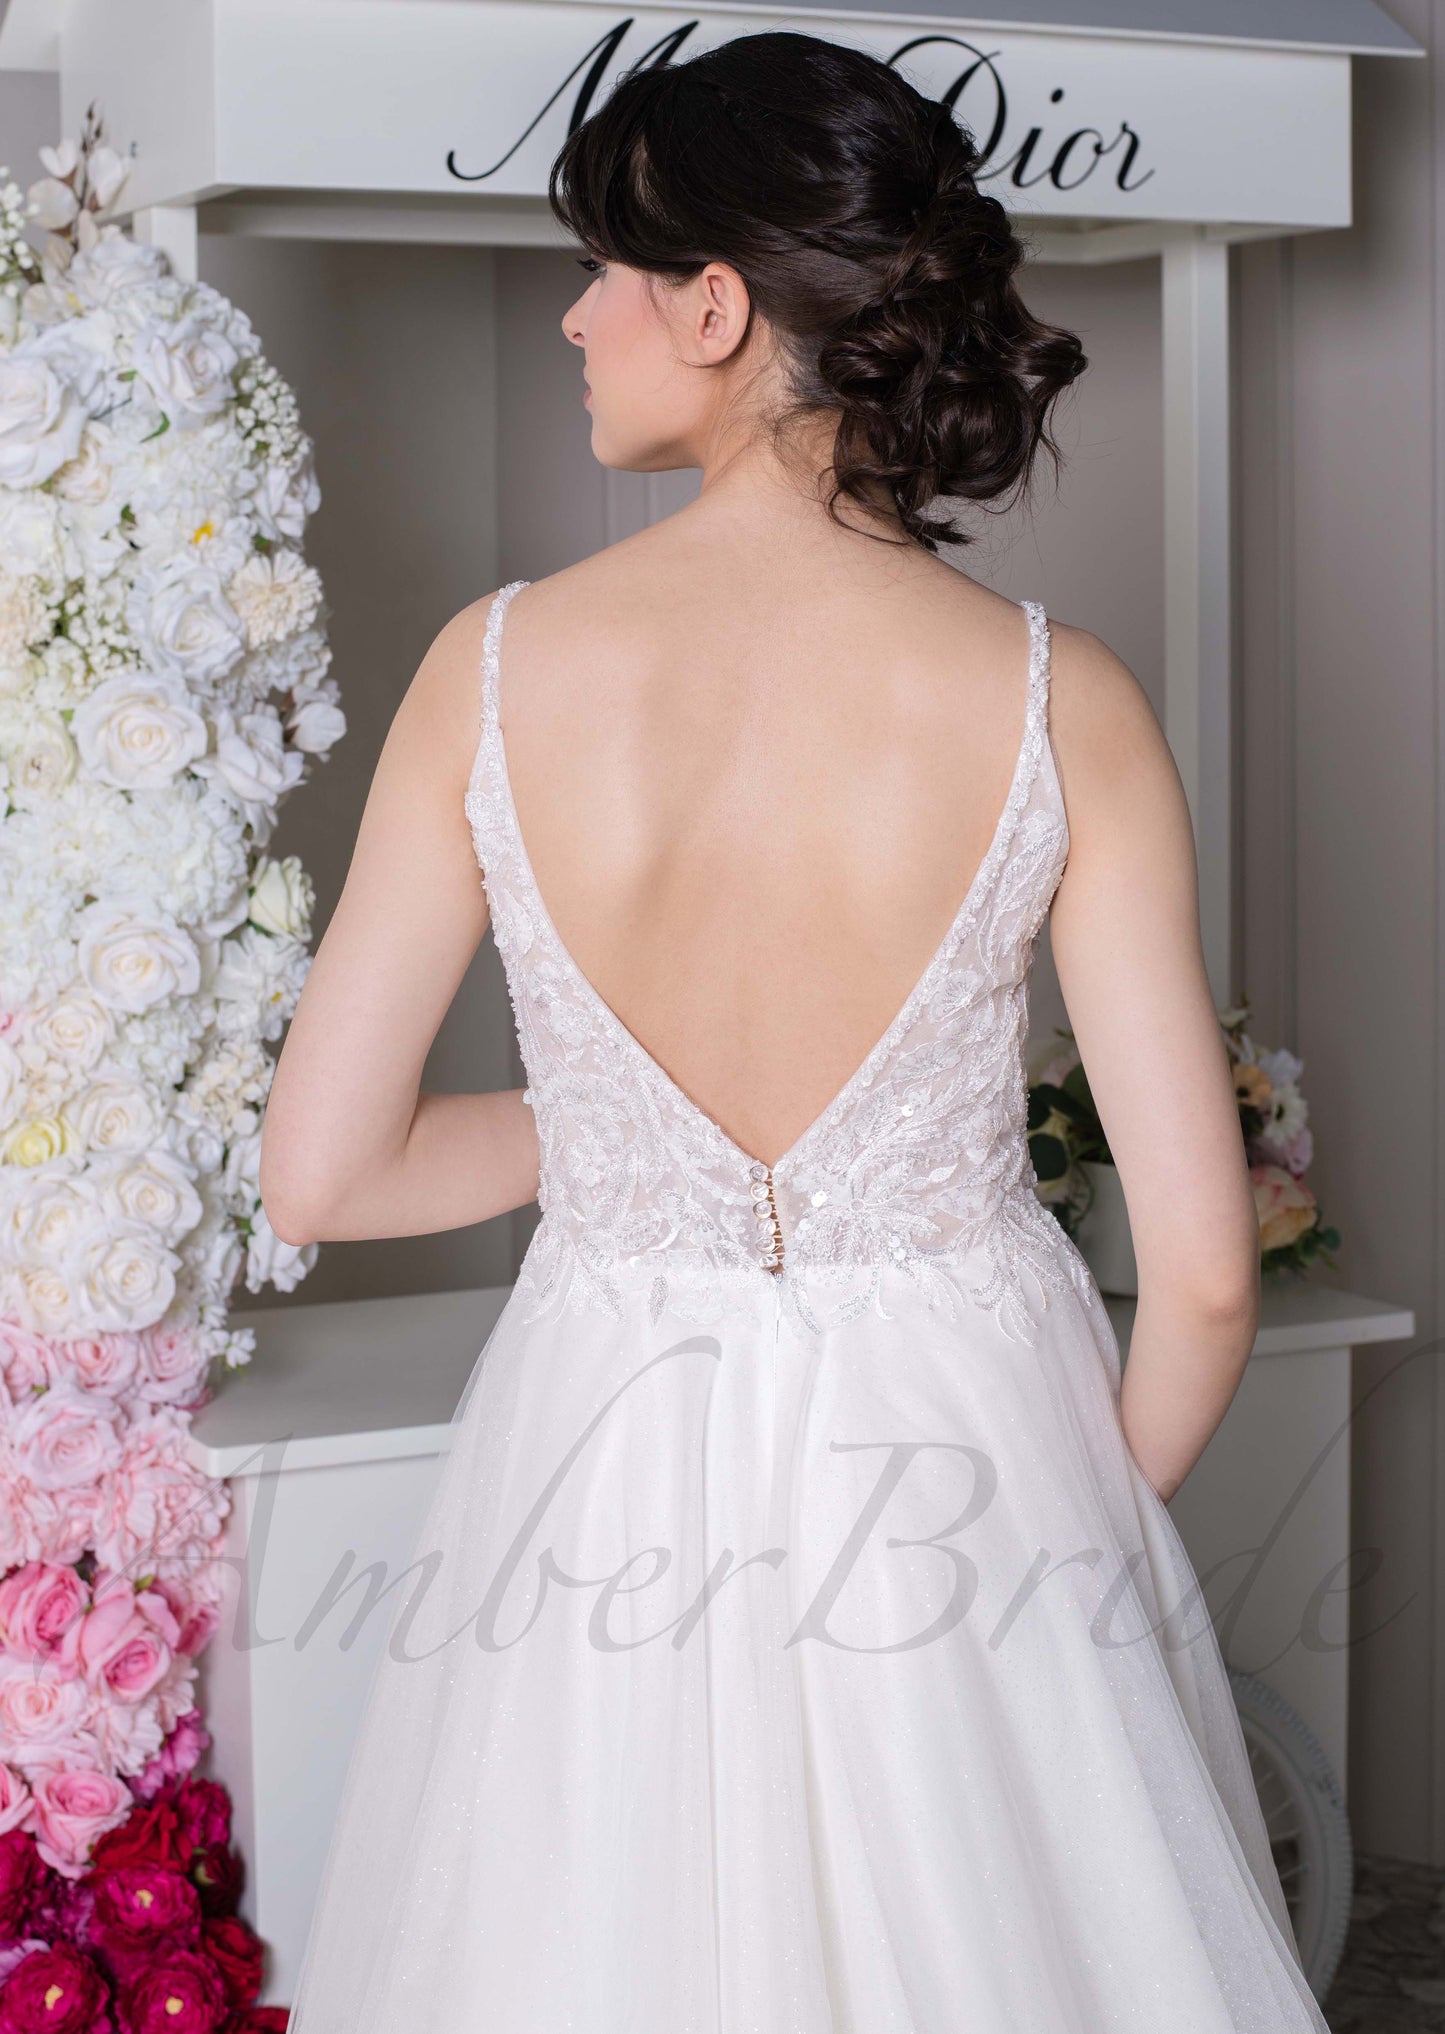 Rustic A Line Glitter Tulle Wedding Dress with Deep V Neck and Backless Design